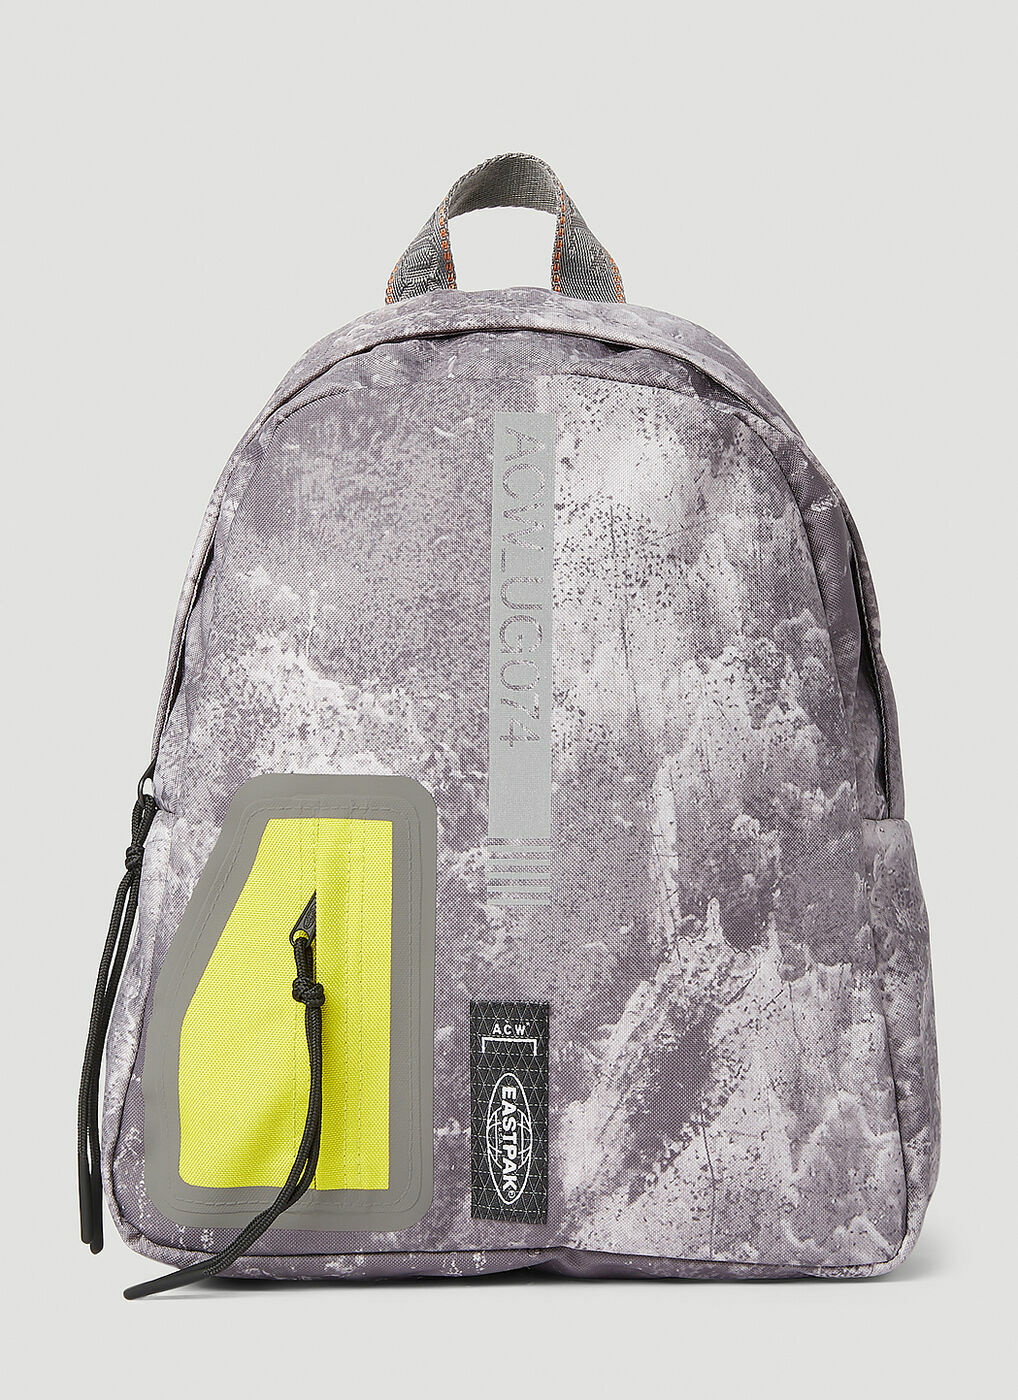 A-COLD-WALL* x Eastpak Greyscale Small Backpack in Light Grey